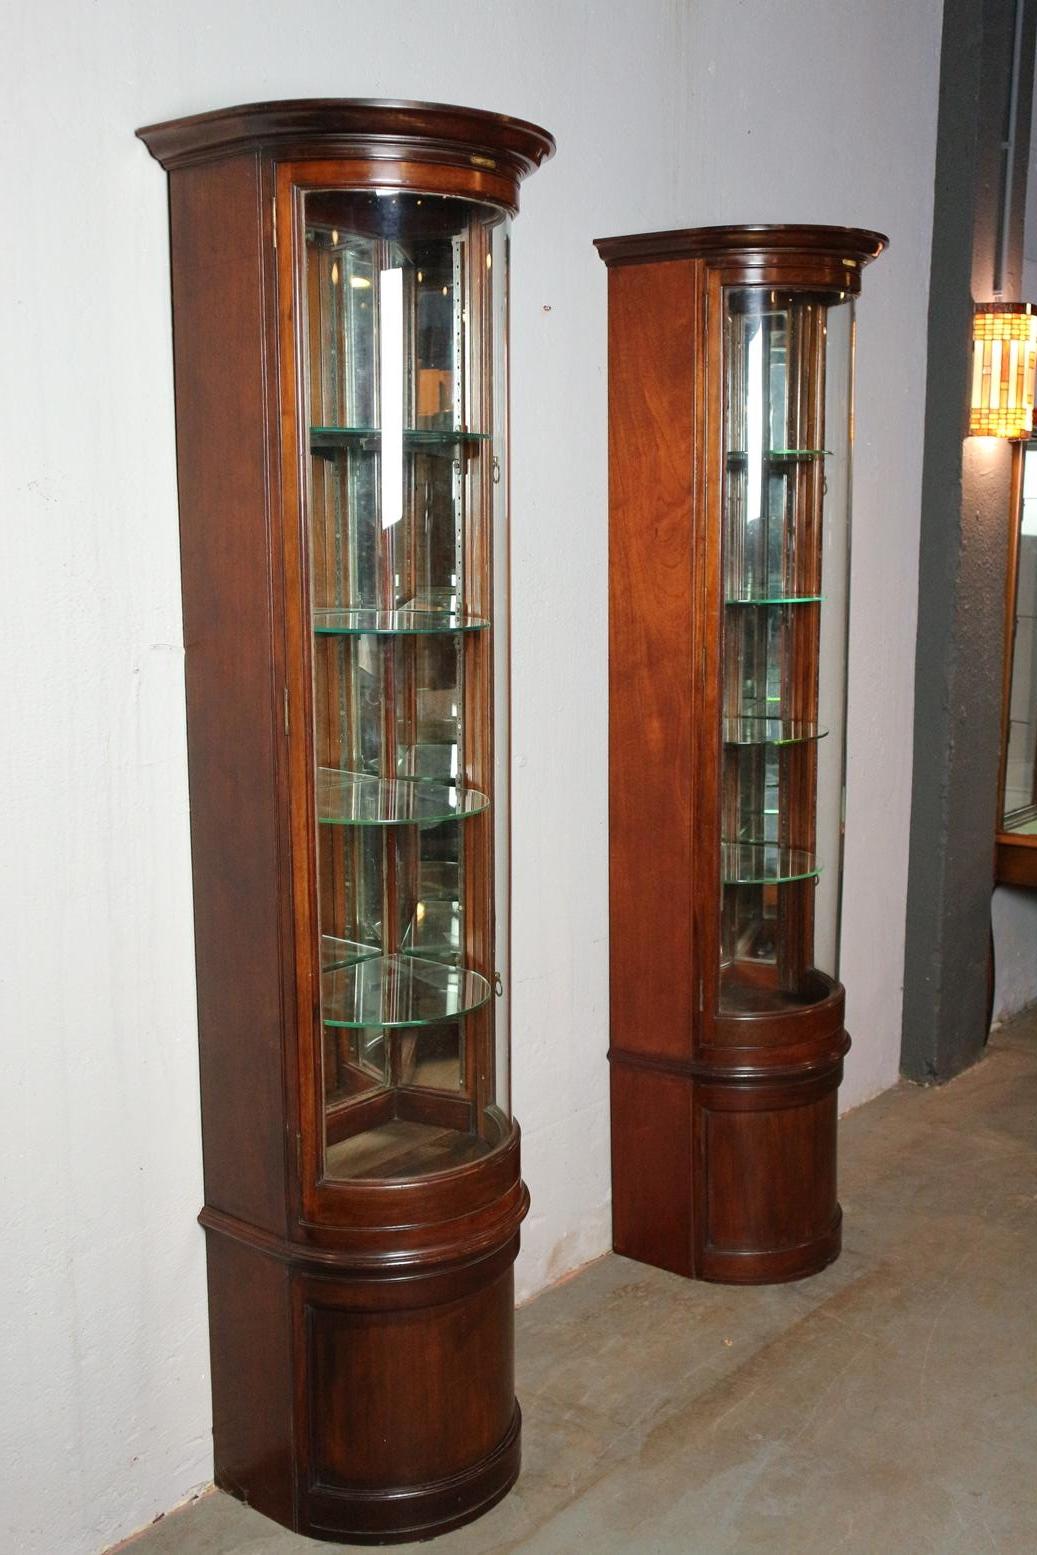 Set of special display cabinets with curved glass. 4 adjustable shelves per display case. Rear wall and part side walls are equipped with mirrors. Curved glass always makes a display case that little bit more special. And a set is unique. Beautiful